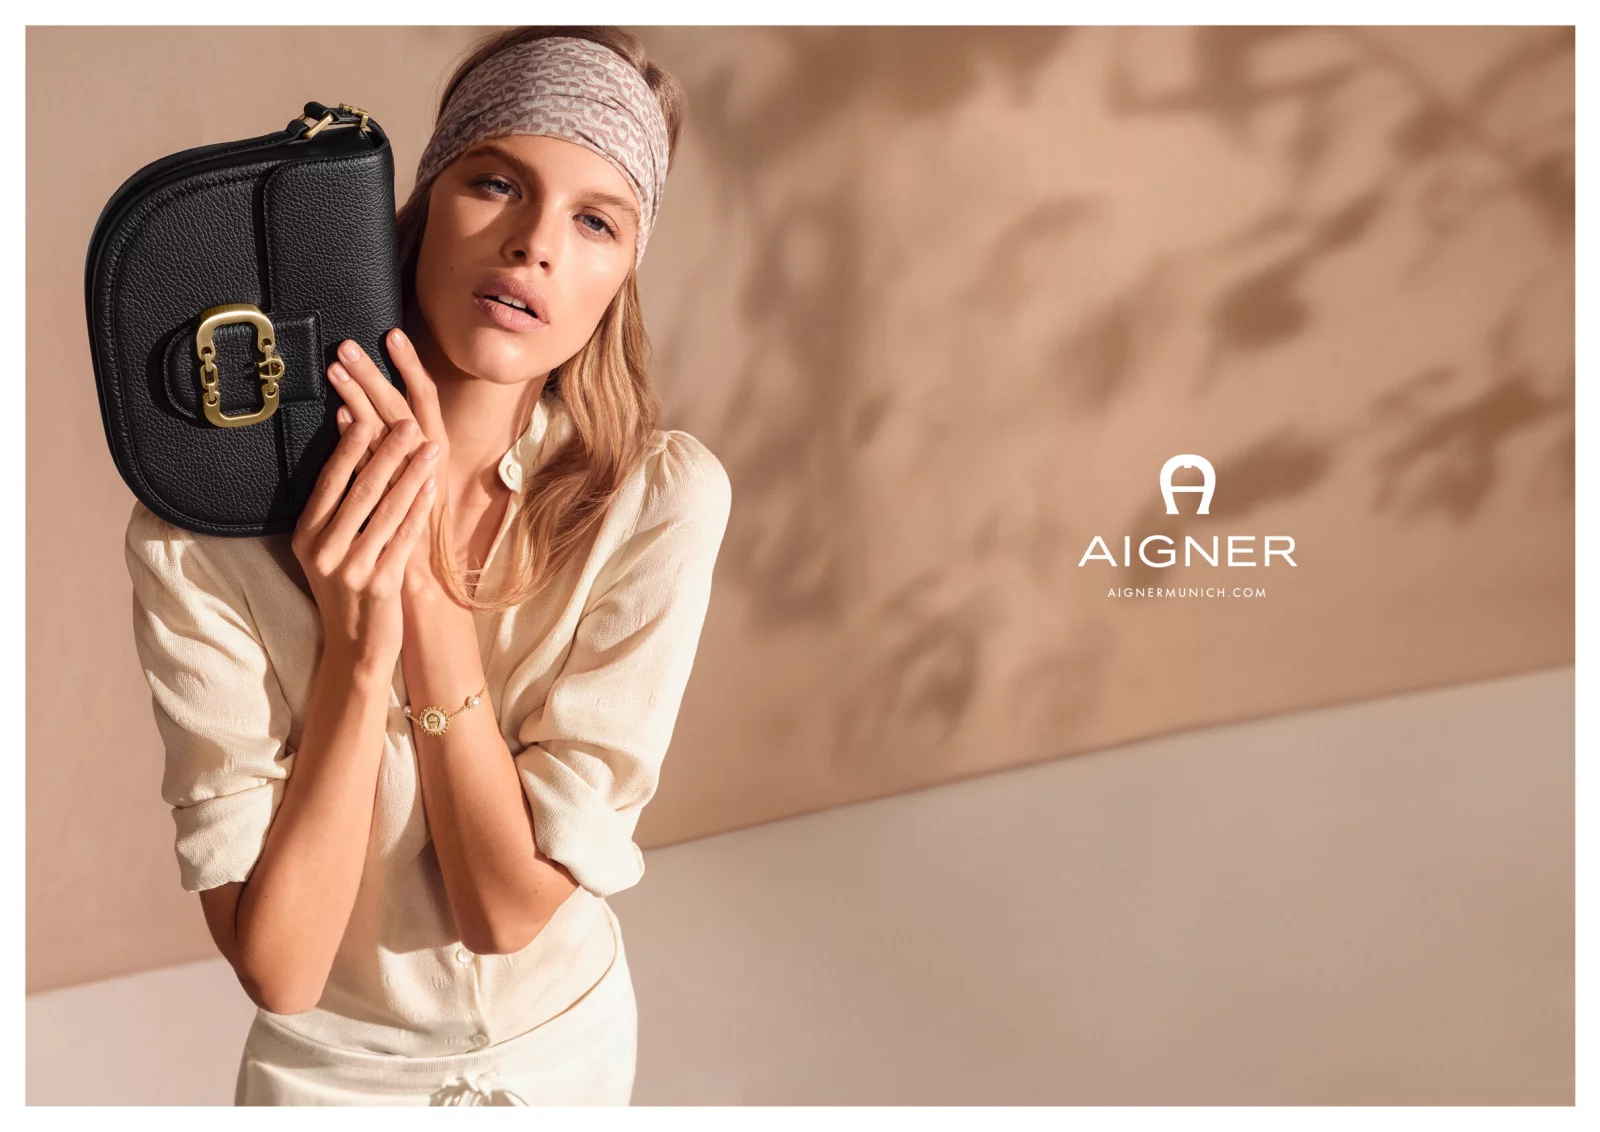 AIGNER 5 by Andreas ORTNER